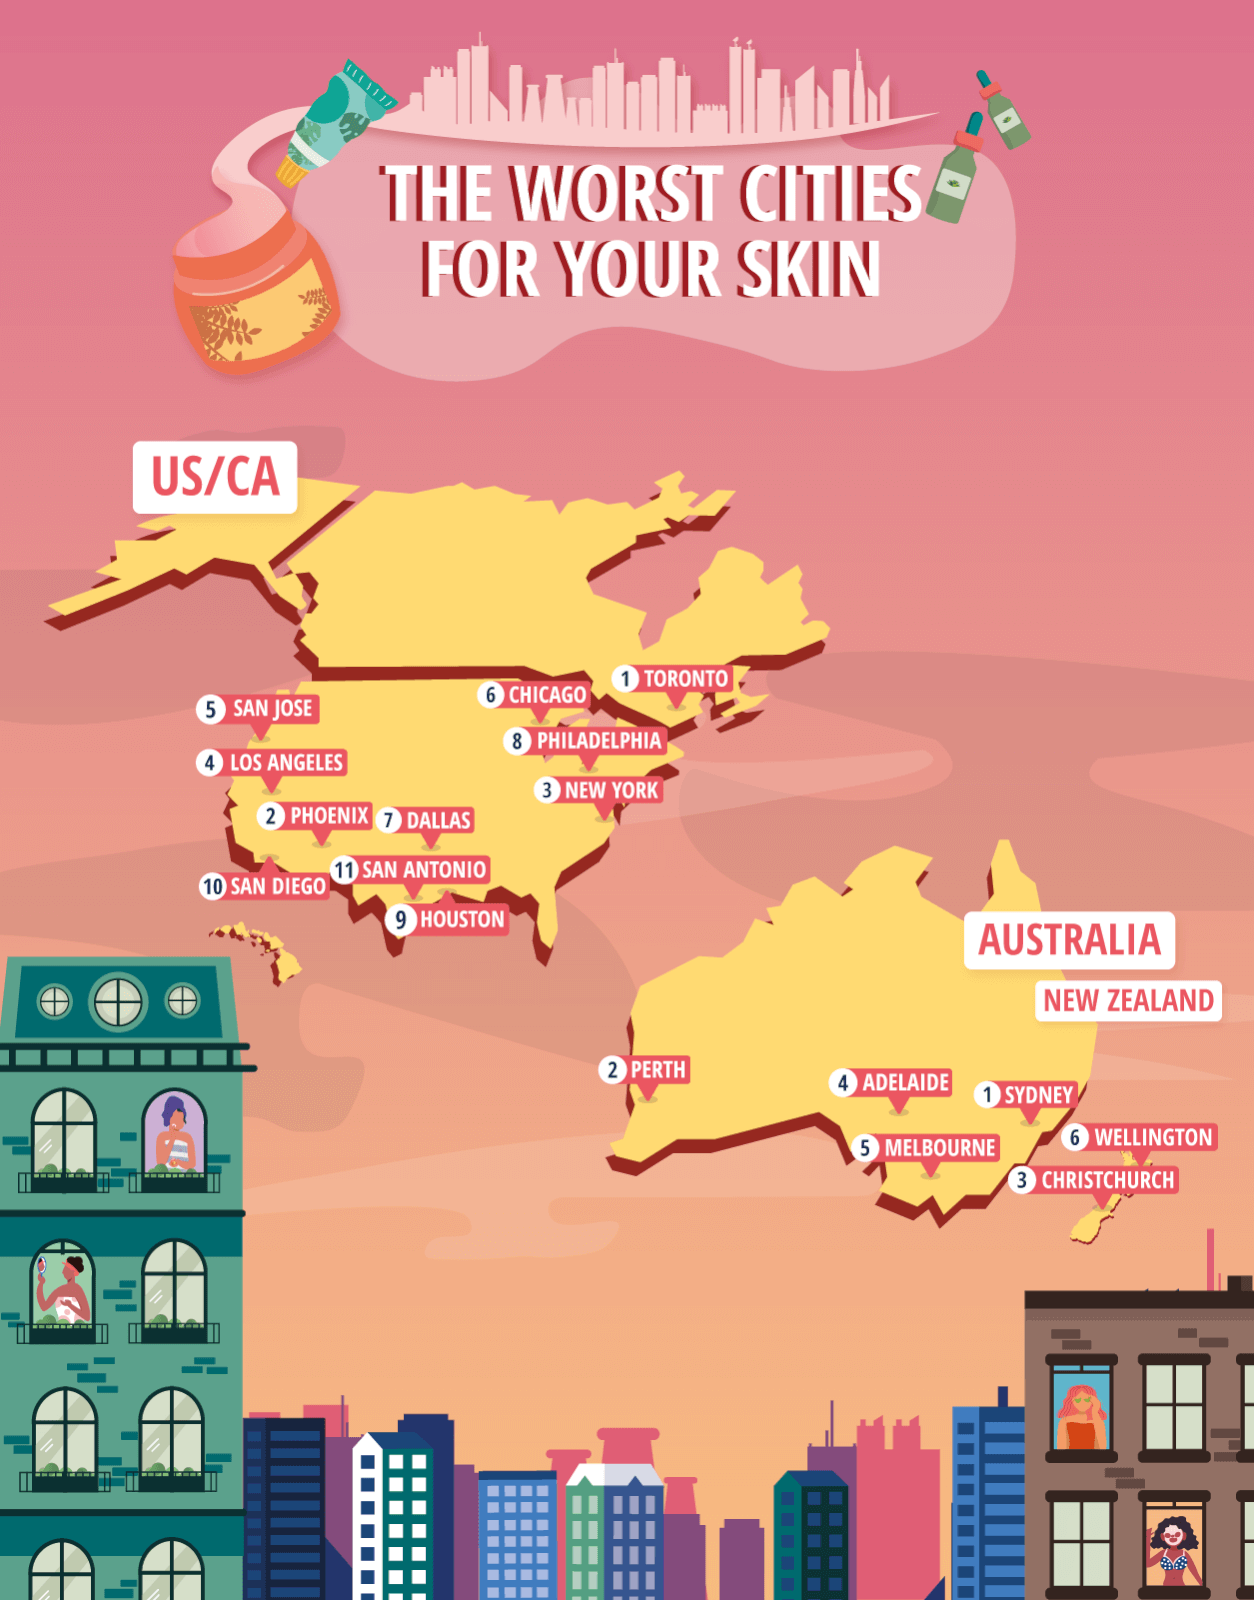 Maps showing the worst cities for your skin in North America, Australia and New Zealand.